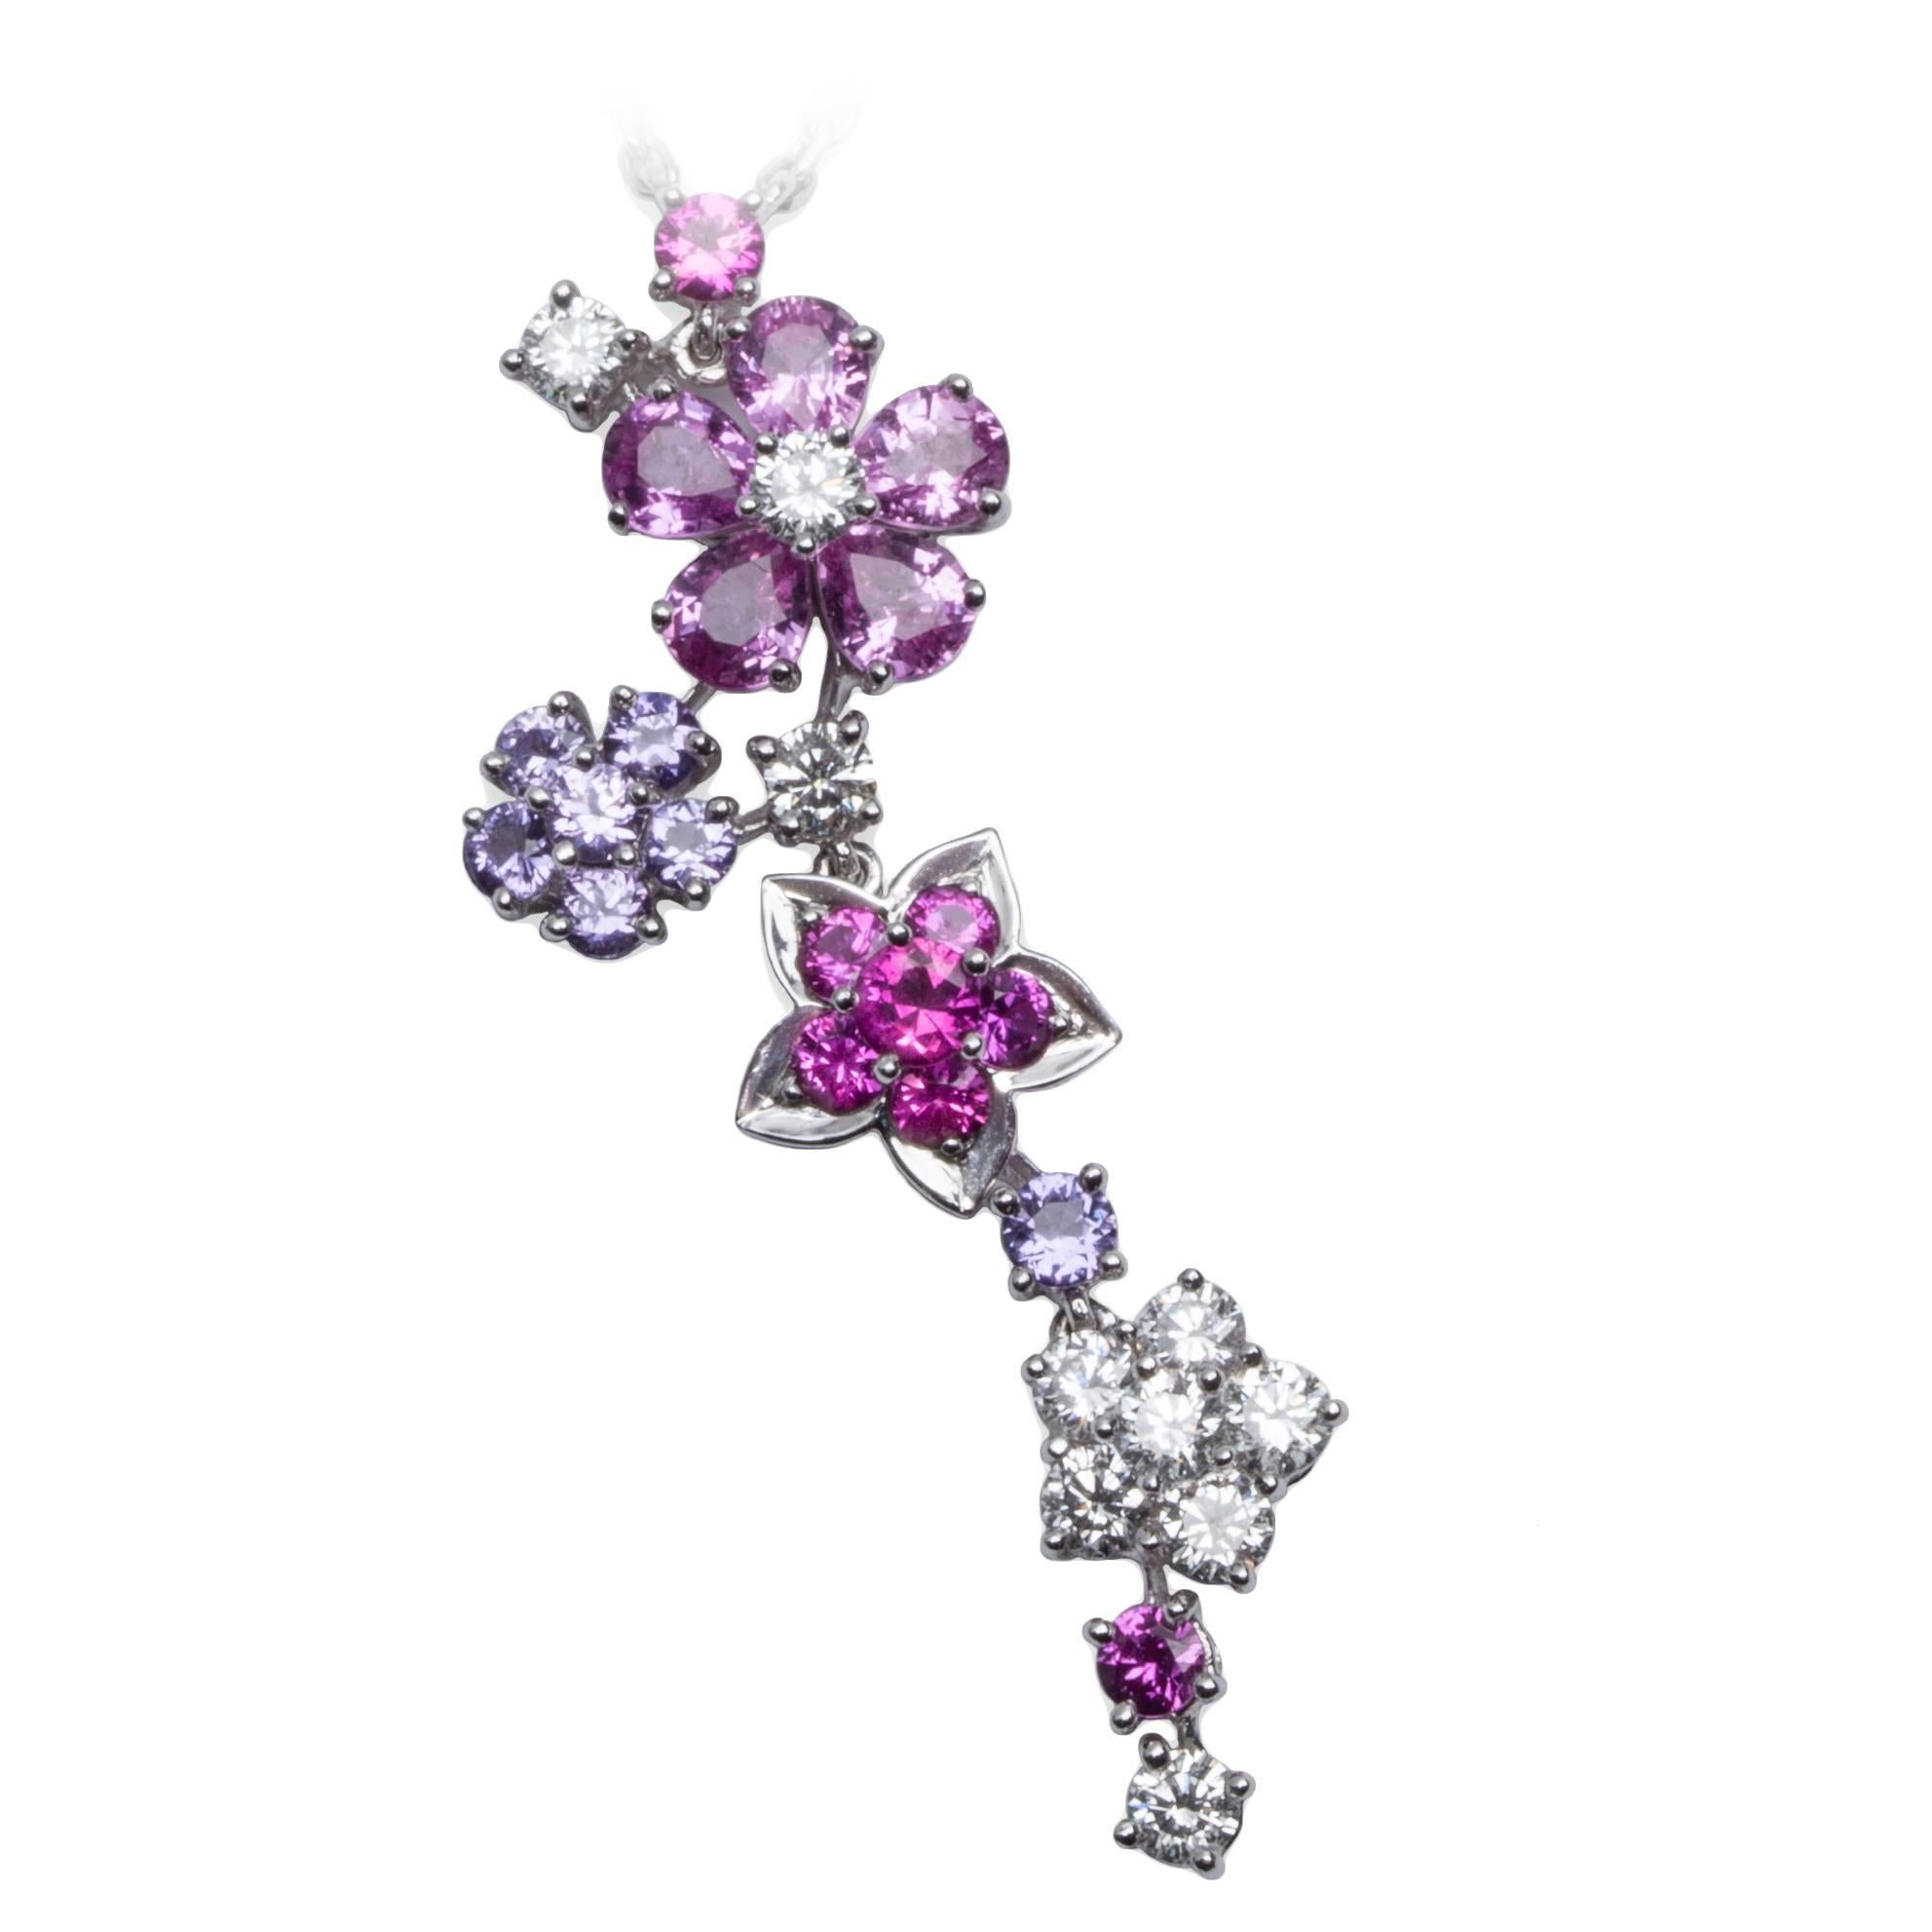 Van Cleef and Arpels diamond and sapphire Folie des Prés pendant necklace in 18K white gold, on 18K white gold chain with bezel set diamond and sapphire accents. Pendant with round diamonds, round & tear drop pink sapphires, and mauve round